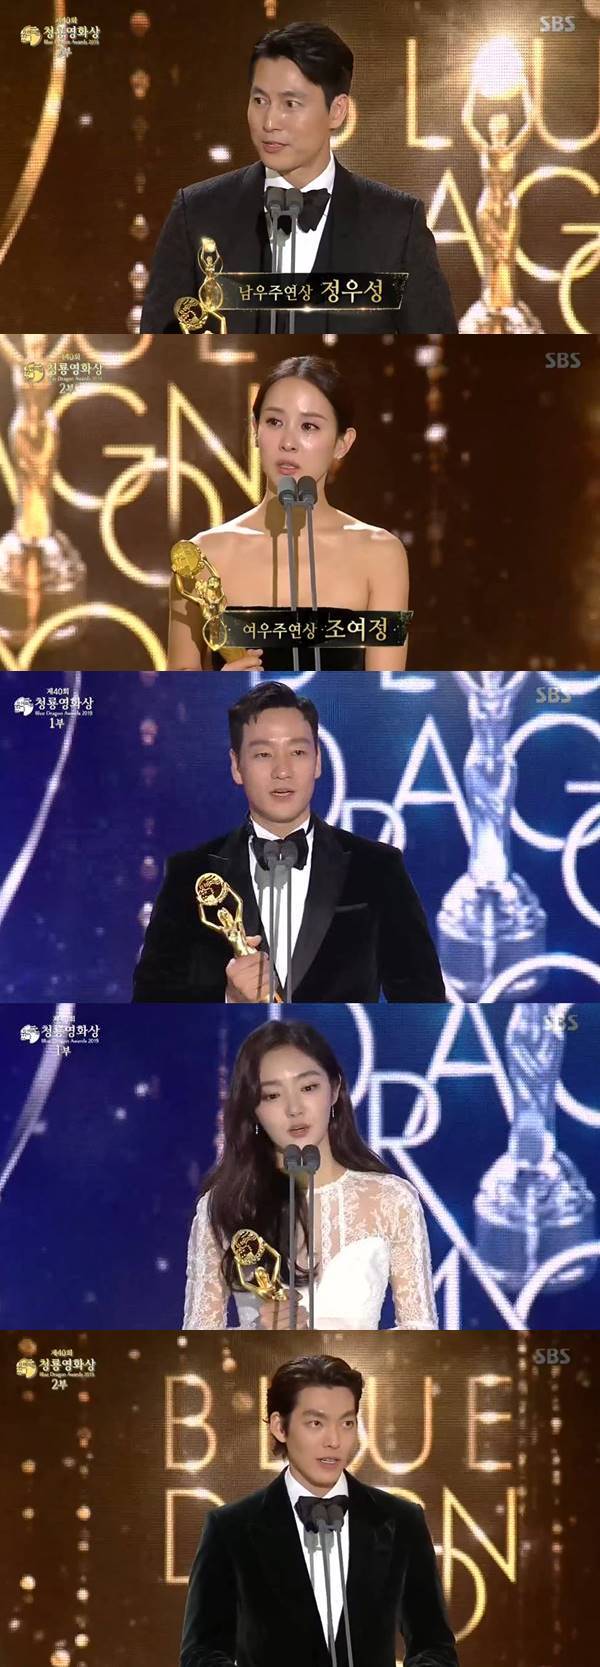 a great achievementThe 40th Blue Dragon Film Awards lead character was the film The Parasites; director Bong Joon-hos The Parasites won the trophy for Best Picture, with its popularity and workability recognized.The 40th Blue Dragon Film Awards were held at Paradise City in Yeongjong-do, Incheon on the afternoon of the 21st under the auspices of Actor Kim Hye-soo and Hyun-seok.The parasite, which received the Palme dOr at the 72nd Cannes International Film Festival in May, won the Best Picture Award, Best Actress Award, Best Supporting Actress Award, Art Award,and enjoyed the joy of.Actor Kang-Ho Song, starring parasite, said, Congratulations to the winners.Parasites are so grateful to 10 million viewers, and the Palme dOr is glorious, but if it is worth more, I dare to think that we can make such a movie, and I am proud that we can watch such a movie without subtitles.I pay tribute to the great Bong coach, staff, and actors who made such pride.Above all, Engine of Youth, the birth of Parasites, was in the warm eyes of the audience, and the audience created Parasites.We will give all of this glory to the audience, he said.The main character in the best actor award was Jung Woo-sung of Witness. Jung Woo-sung said, I sat down and watched the awards ceremony.I wanted to tell you that I thought you were going to get parasites, he said, and Ive been to the Blue Dragon Film Awards quite a lot, and Im the first best actor to win a movie.When I stood by, I was awarded this award. Mr. Kim, who was with me, was a wonderful partner.I think Juri is happy with the man who is watching me with this trophy, and my friend Lee Jung-jae, who is more happy than anyone else. I want to share my joy with everyone. Cho Yeo-jeong, who had been tearful since the name was called, said, I did not know that parasites would receive the best actress award.I was always calm, but I didnt know. Im so grateful. Actors favorite character is different.I thought it was a little unrealistic because it was so good, and I was so loved. I was not expecting the award today.It was a character Id always waited for. Im so grateful for the parasites. At one point, acting seemed like a crush.In a way, it was my Engine of Youth. I will always walk silently. The best supporting actor was awarded by Jo Woo-jin of National Insolvency Day. Jo Woo-jin said, The more you play, the harder it seems.If you have to butter, I will do my best as usual, using this prize as an indicator. I am grateful to the two women who are in the house to be more happy than anyone. Lee Jung-eun of the parasite who won the Best Supporting Actress award said, It seems to be receiving the spotlight too late. I myself needed time until I became such a face or body.I was so scared because I was so attracted to the parasites, saying, I was studying when I saw Kang-Ho Song, who worked hard for teamwork, and the director thinking about his work every day.After the official event, I tried to spend a lot of time in other works. I was given this prize.I am grateful to all the actors and staff who have been together in the parasite. The main character of the new actor was Park Hae-soo of Quantum Physics. Park Hae-soo said, I am todays birthday.I thanked my parents and thought there would be a reason why I was born when I came, but I have been hoping to become an actor who comforts someone.I still think it is a long way to go, but I think it is a prize that I have given to help me take a step forward.Kim Hye-joon, who received the New Actress Award for Minor, said, Mature is a precious work for me.I sincerely thank Kim Yoon-seok, who gave me the role of Juri of Minor and told me that I deserve to be loved.I will always play with a healthy mind so that those who see me can receive the comfort and energy that I felt while filming the seniors and staff members who walked with me. The top audience was the extreme job that became the first 10 million films this year. The extreme job attracted a cumulative 16.26 million viewers and heated the theater earlier this year.Lee Byung-hun said, I am not the only one who is receiving it. I came up on behalf of the team. I will use it meaningfully to make good movies and the power that the audience has created.In particular, director Bong Joon-ho of Parasites, who won the directors award, said, I am sorry that I have caused a lot of trouble because most of the excellent coaches who were nominated together are juniors.Im grateful to the great actors, staff, and great artists who have made me act as a director, he said. Im grateful to you for being the first person to win the Blue Dragon Film Award.I will continue to be the most creative parasite of Korean films and become such a creator who is parasitic to the Korean film industry forever.Meanwhile, the 40th Blue Dragon Film Awards won a total of 18 awards.It was selected through a survey conducted by experts in various fields of film industry for Korean films released from October 12, 2018 to October 10, 2019.